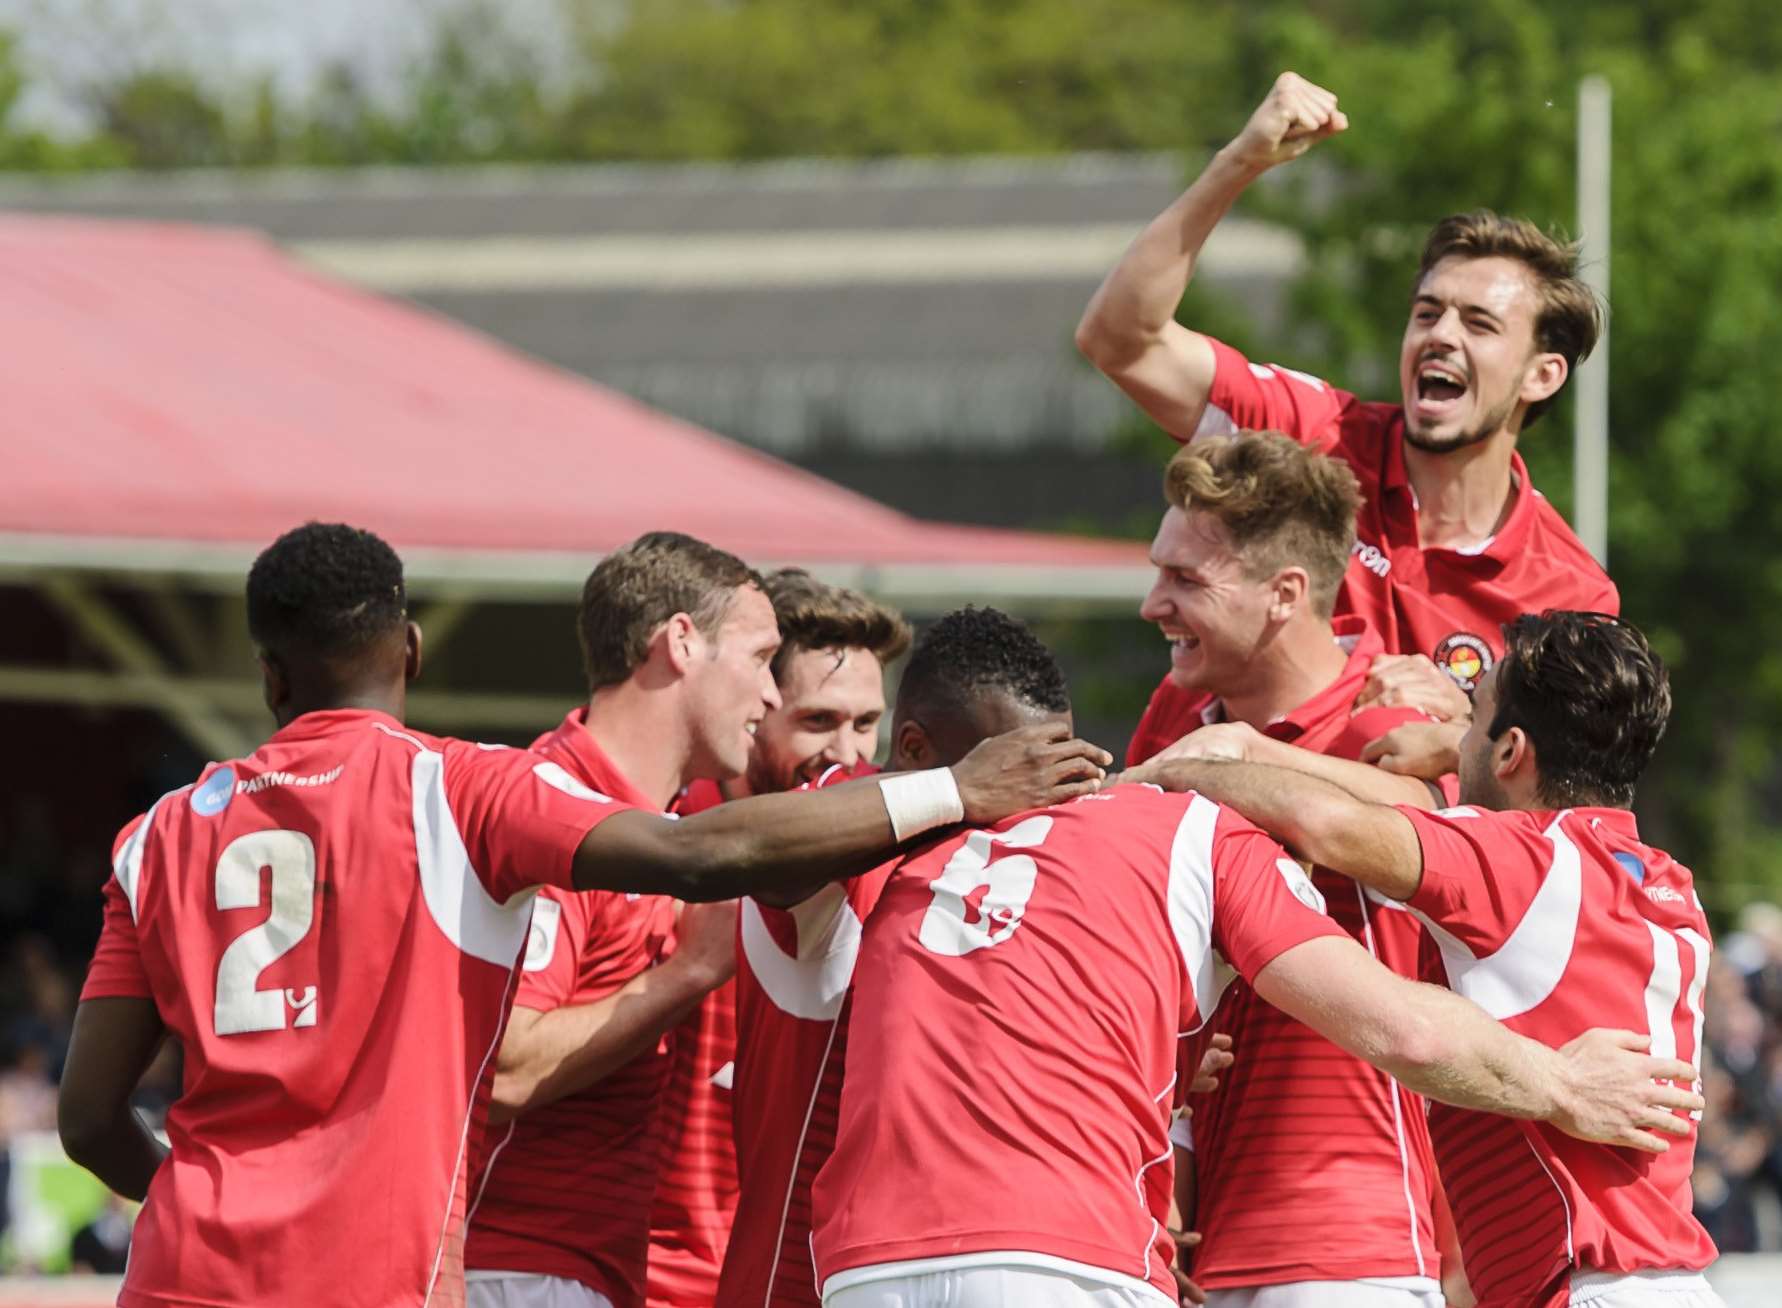 Ebbsfleet have one last chance to get promotion this season